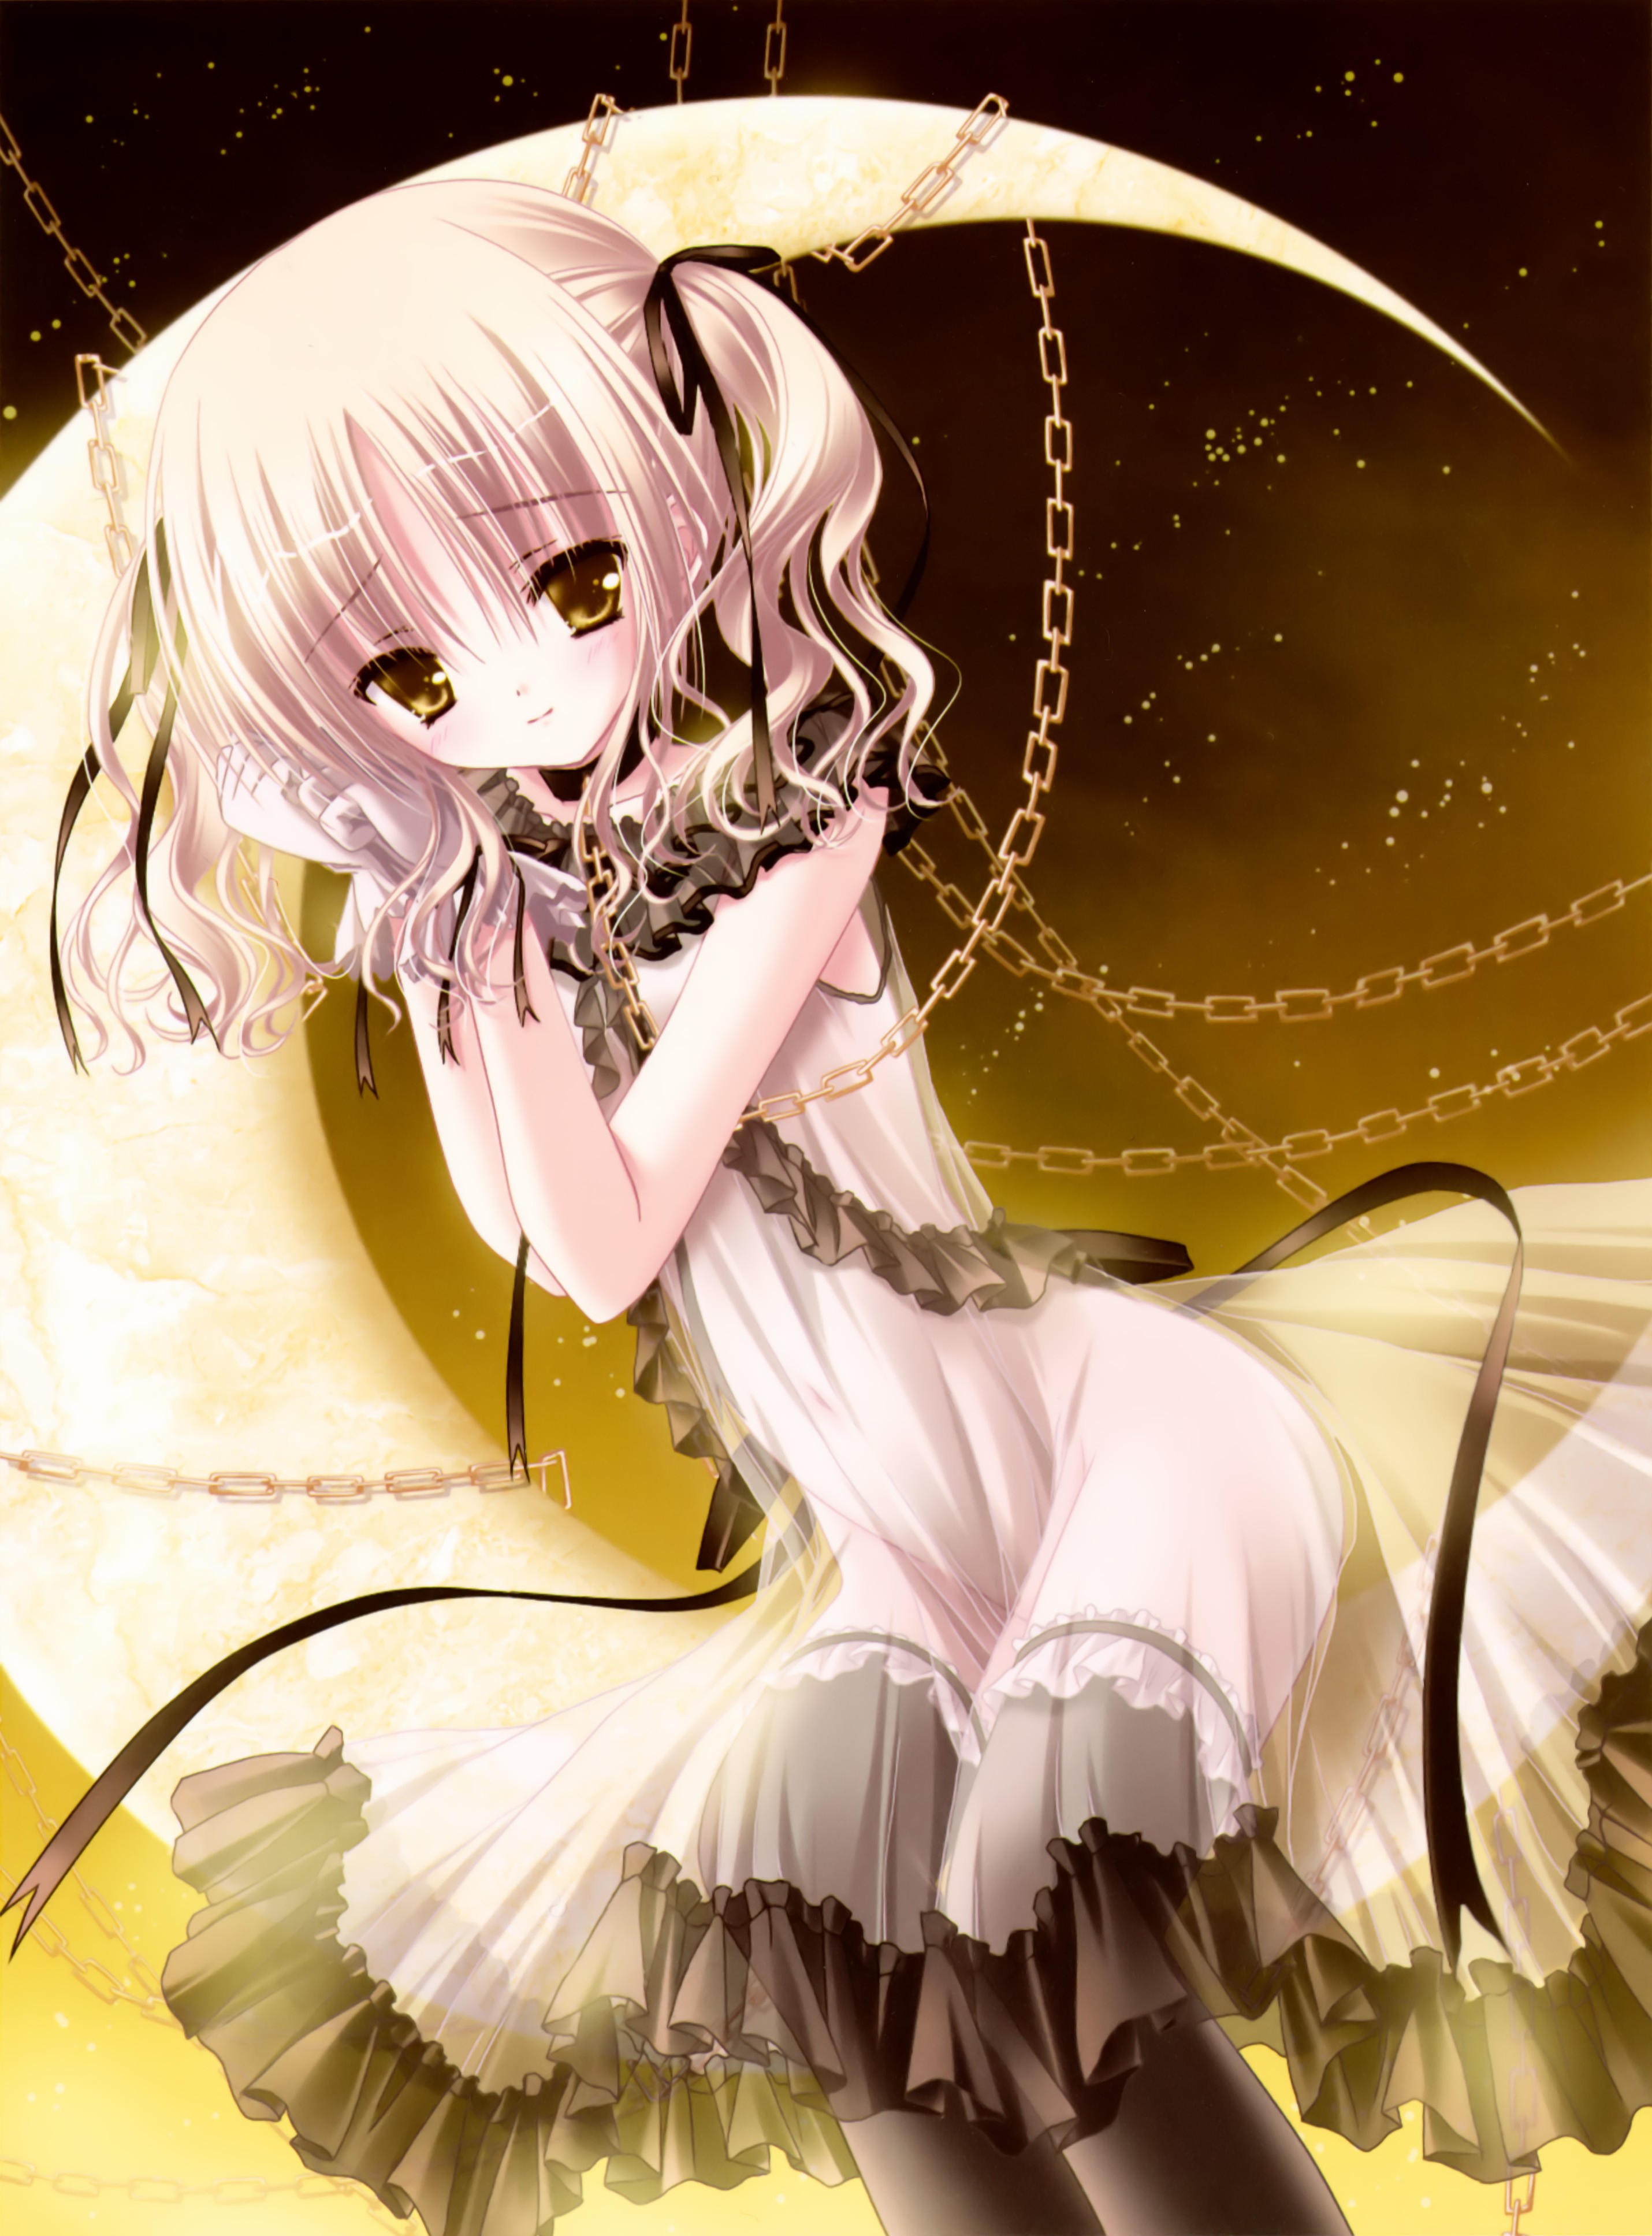 blondes, dress, Moon, ribbons, lolicon, anime, chains, Tinkle Illustrations, anime girls - desktop wallpaper